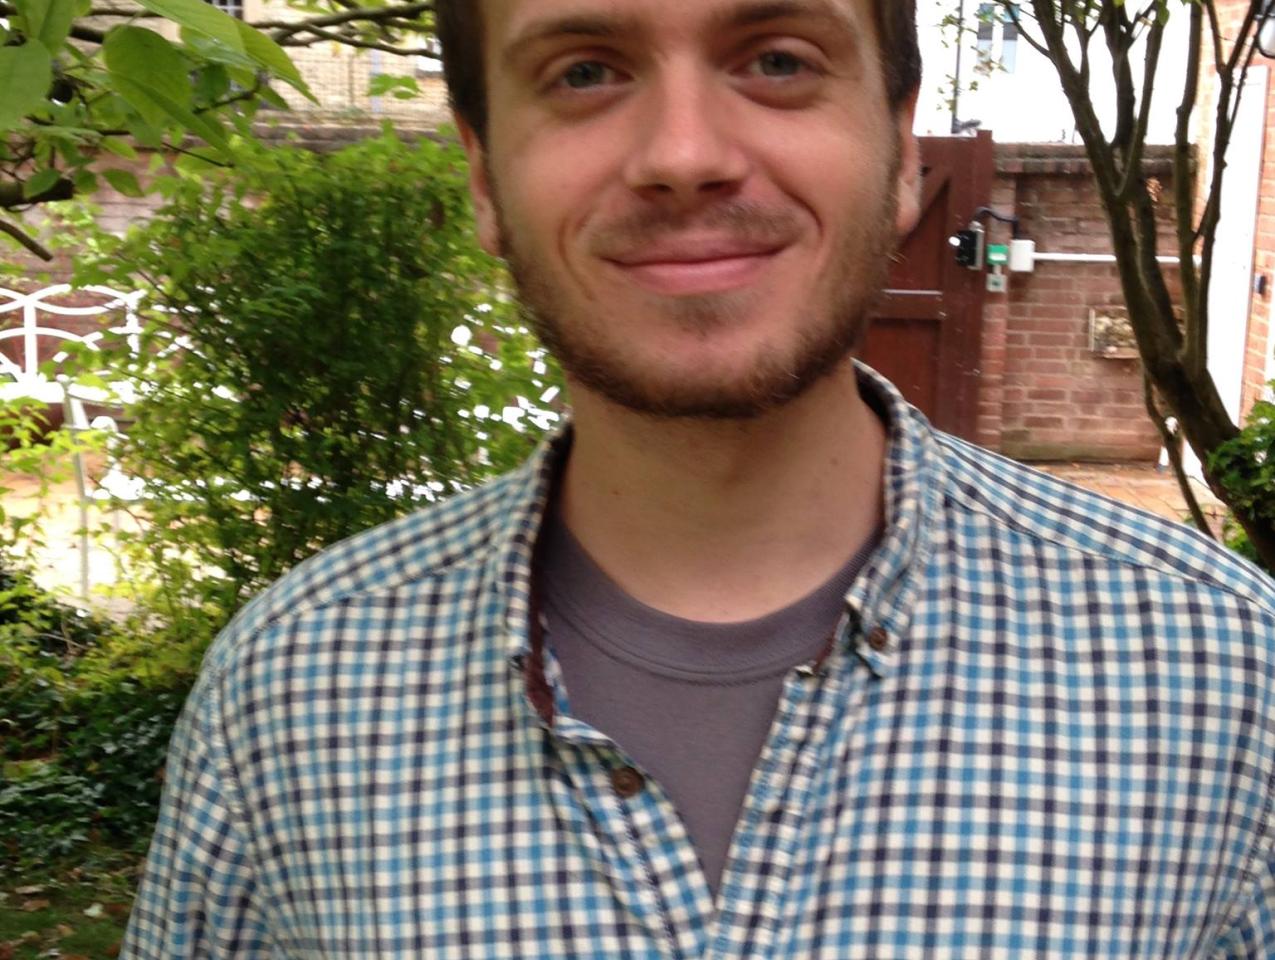 Silas Palmer fellowship recipient Benjamin Musachio is currently a Stanford undergraduate student whose research focuses on Slavic languages and literature.